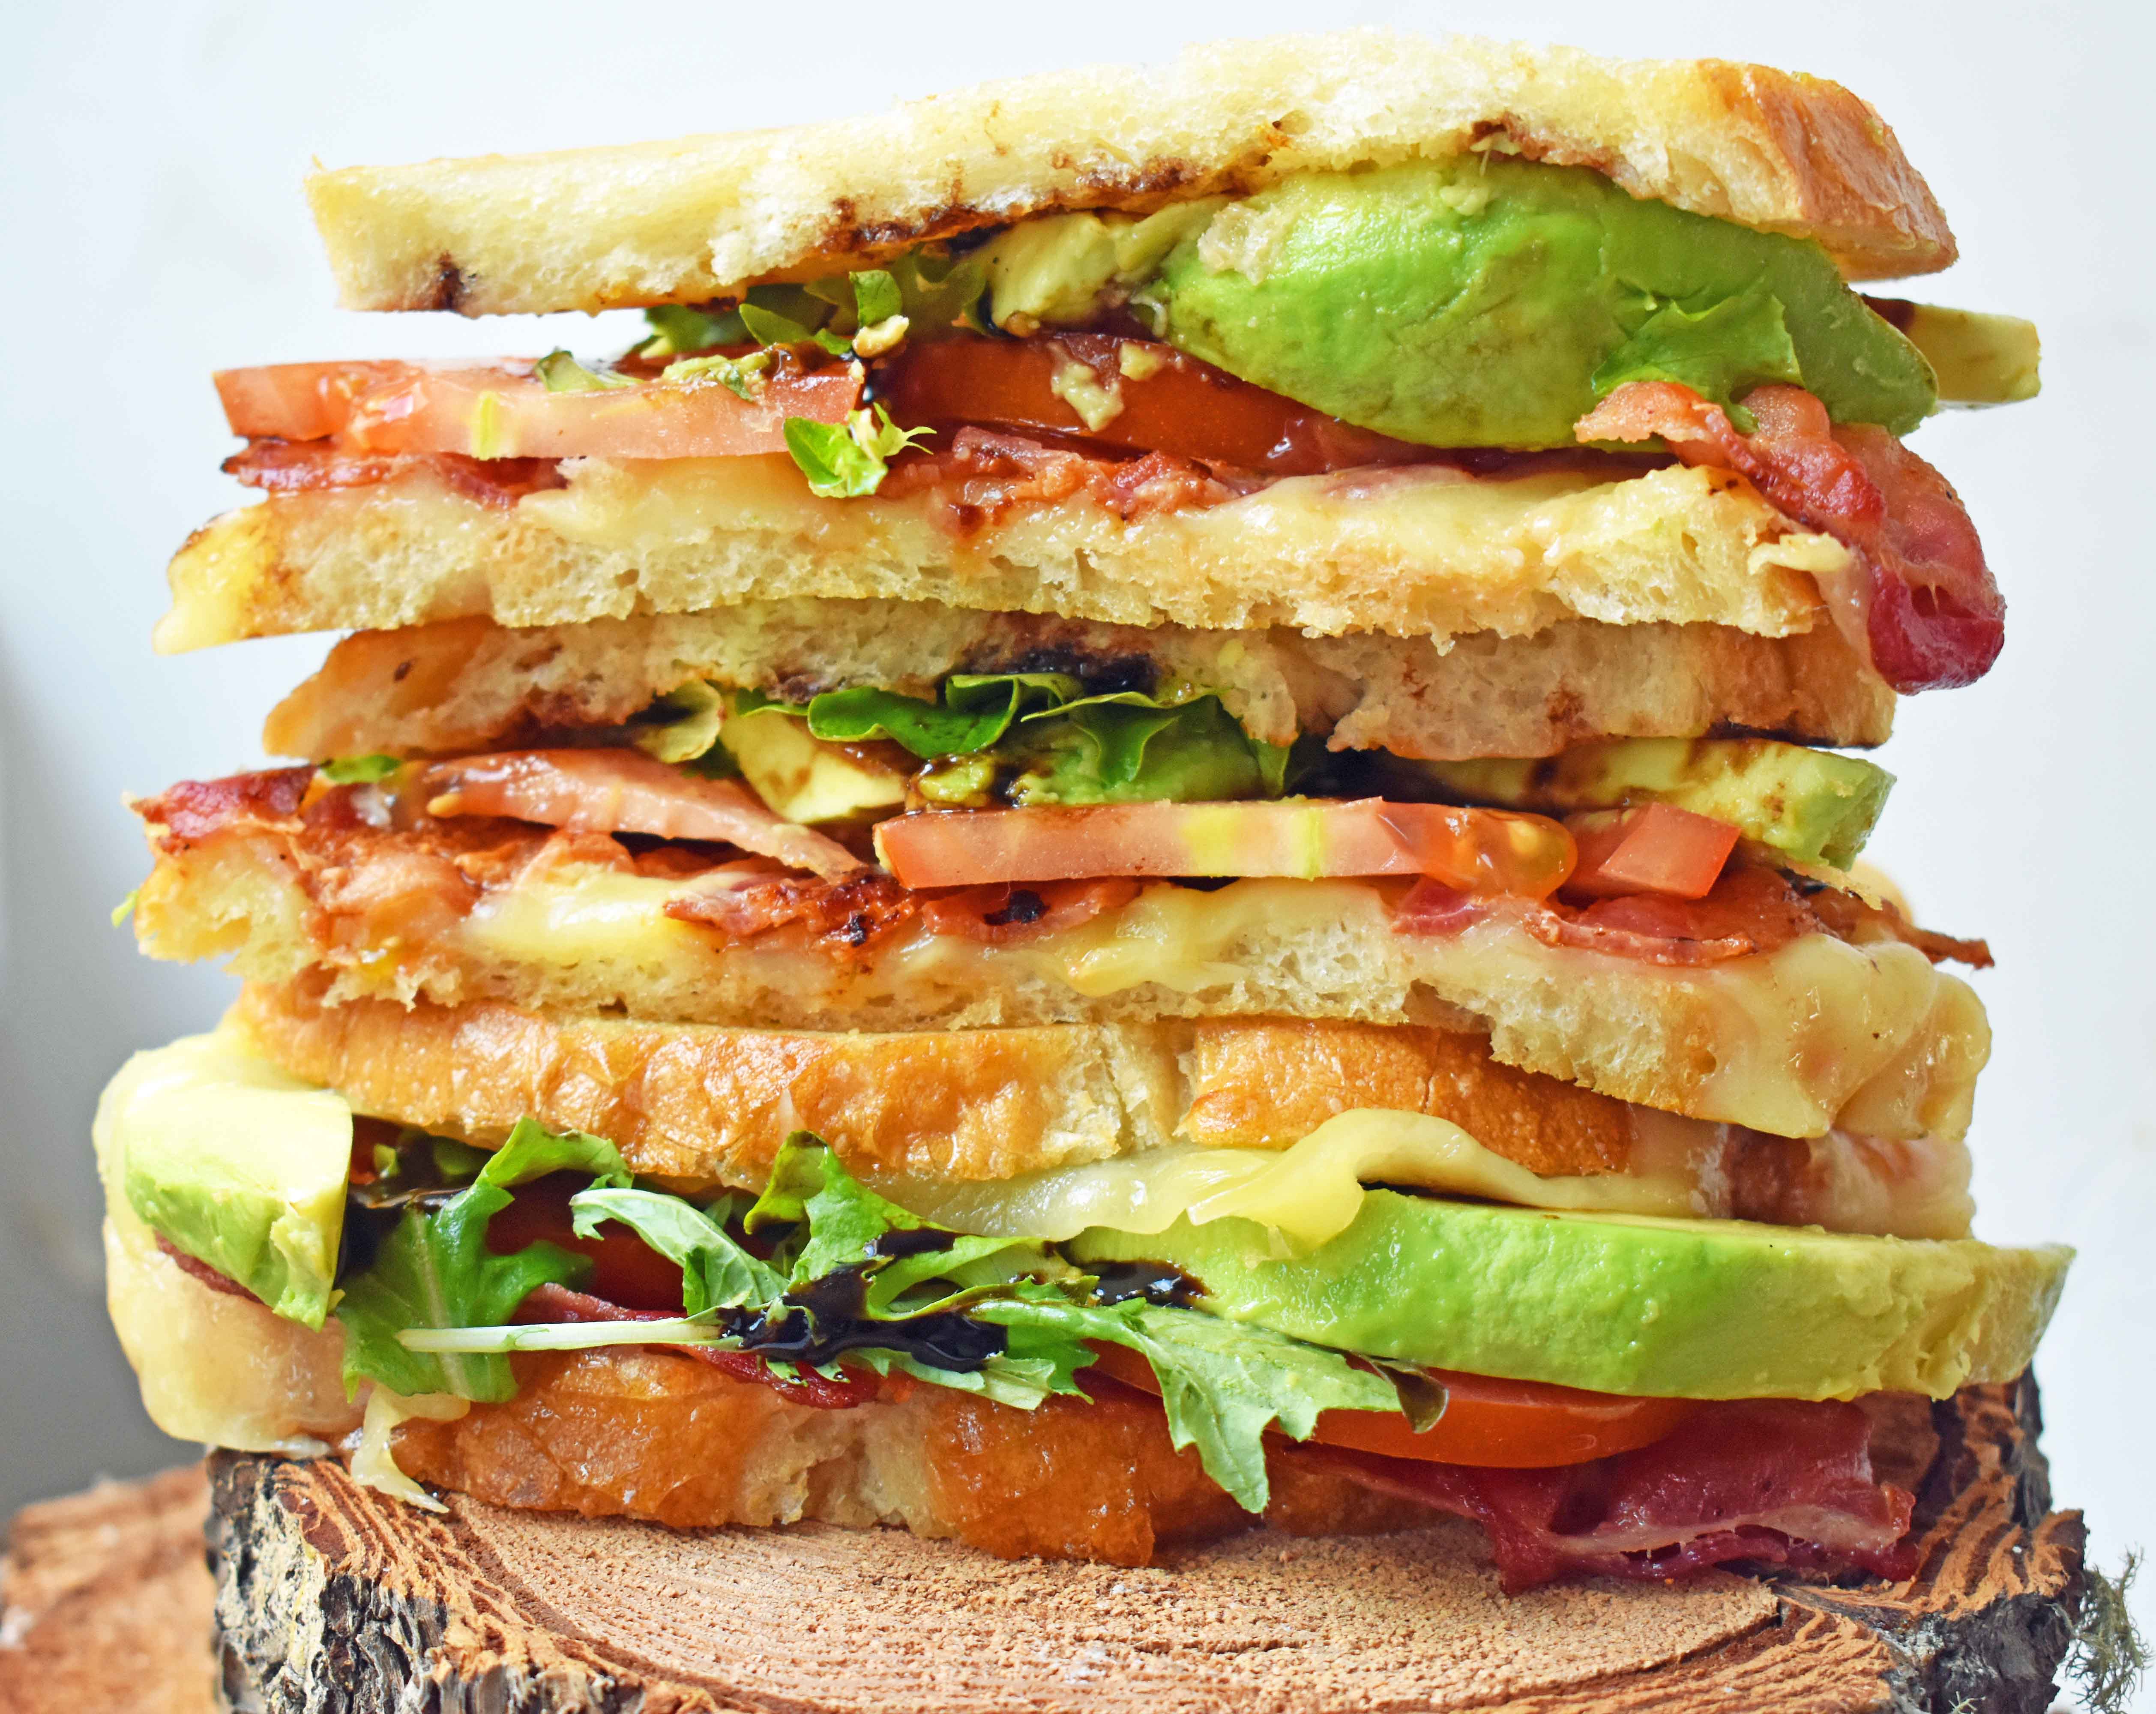 Grown Up Grilled Cheese Sandwich. Three different types of cheese - Swiss, White Sharp Cheddar, and Pepper Jack, crispy bacon, creamy avocado, thinly sliced tomatoes, spring mix, and drizzled with balsamic glaze. A grilled cheese sandwich full of flavor! www.modernhoney.com